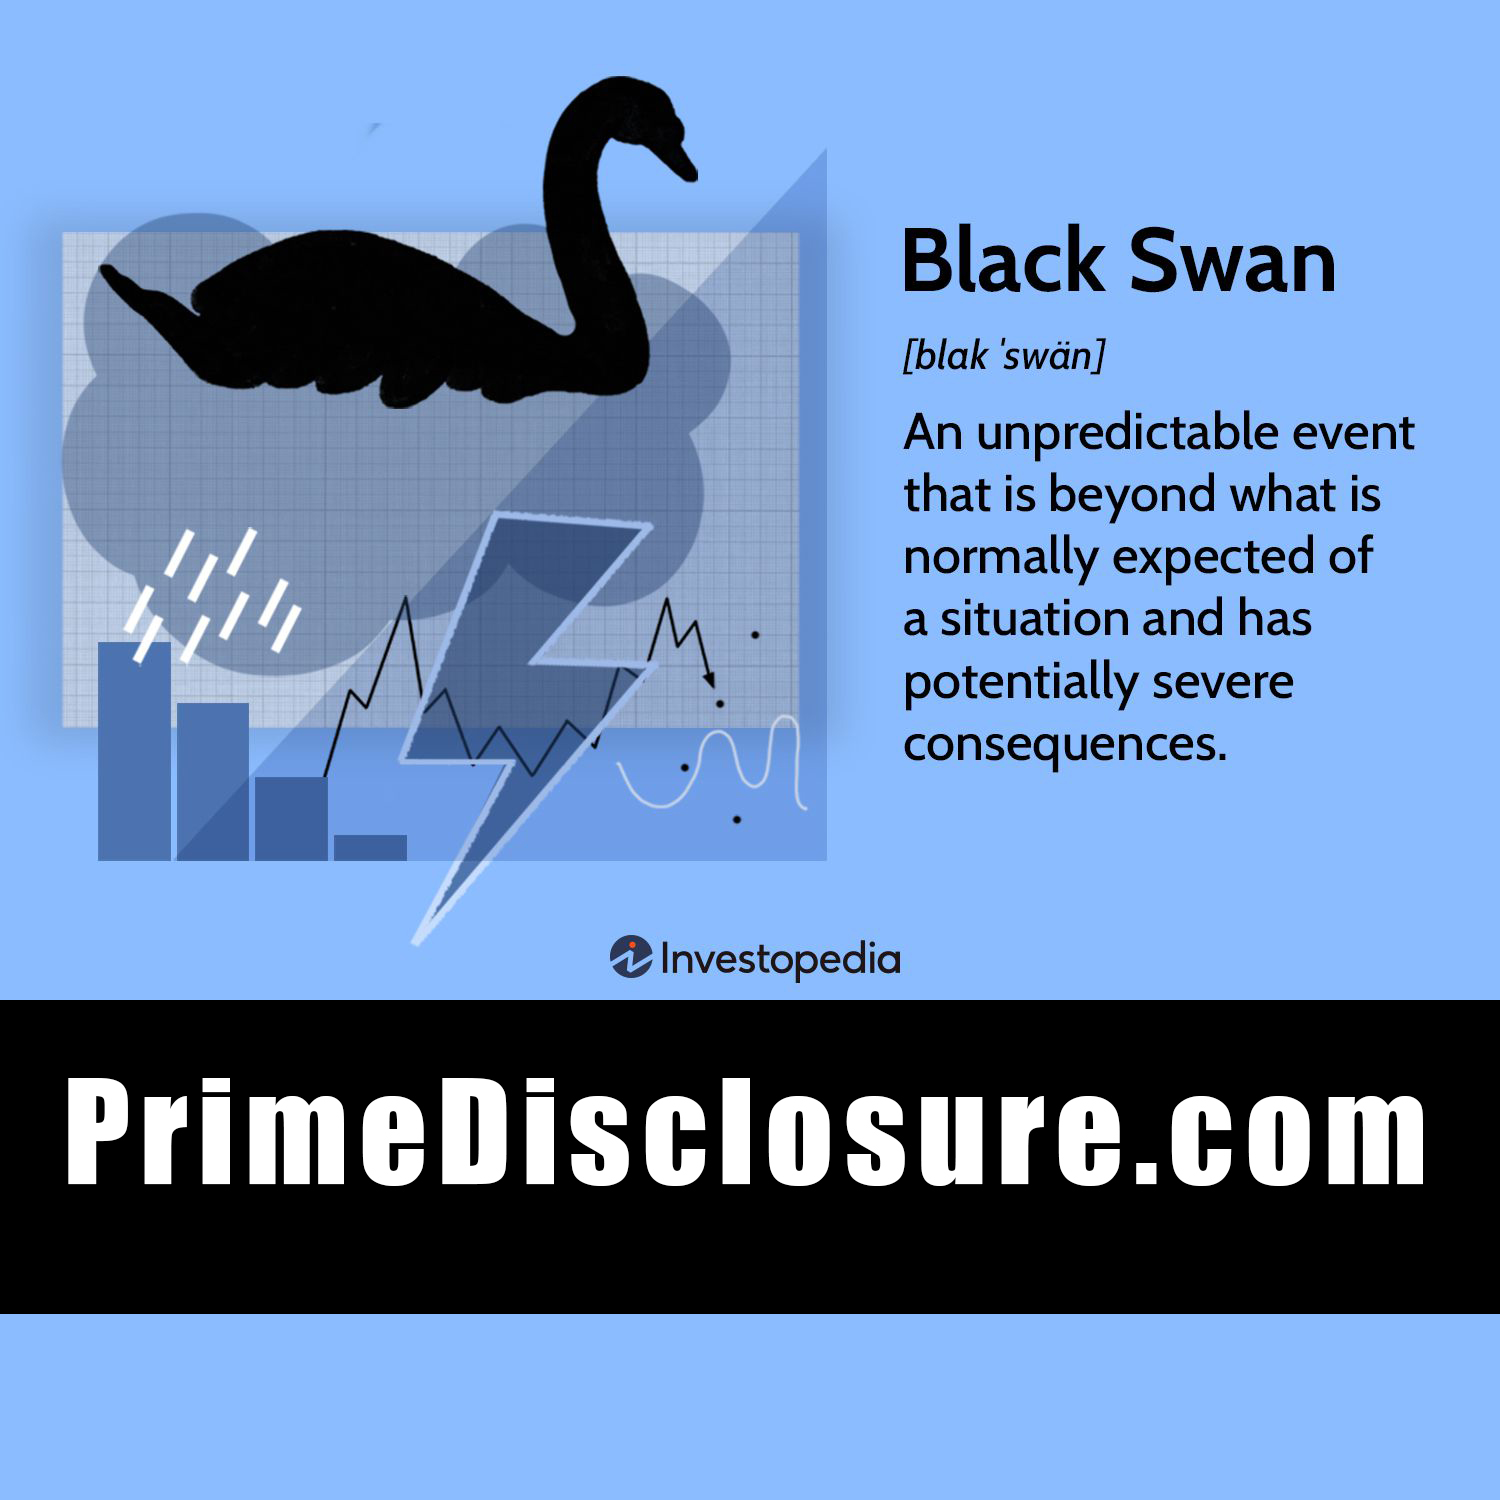 The Black Swan Event